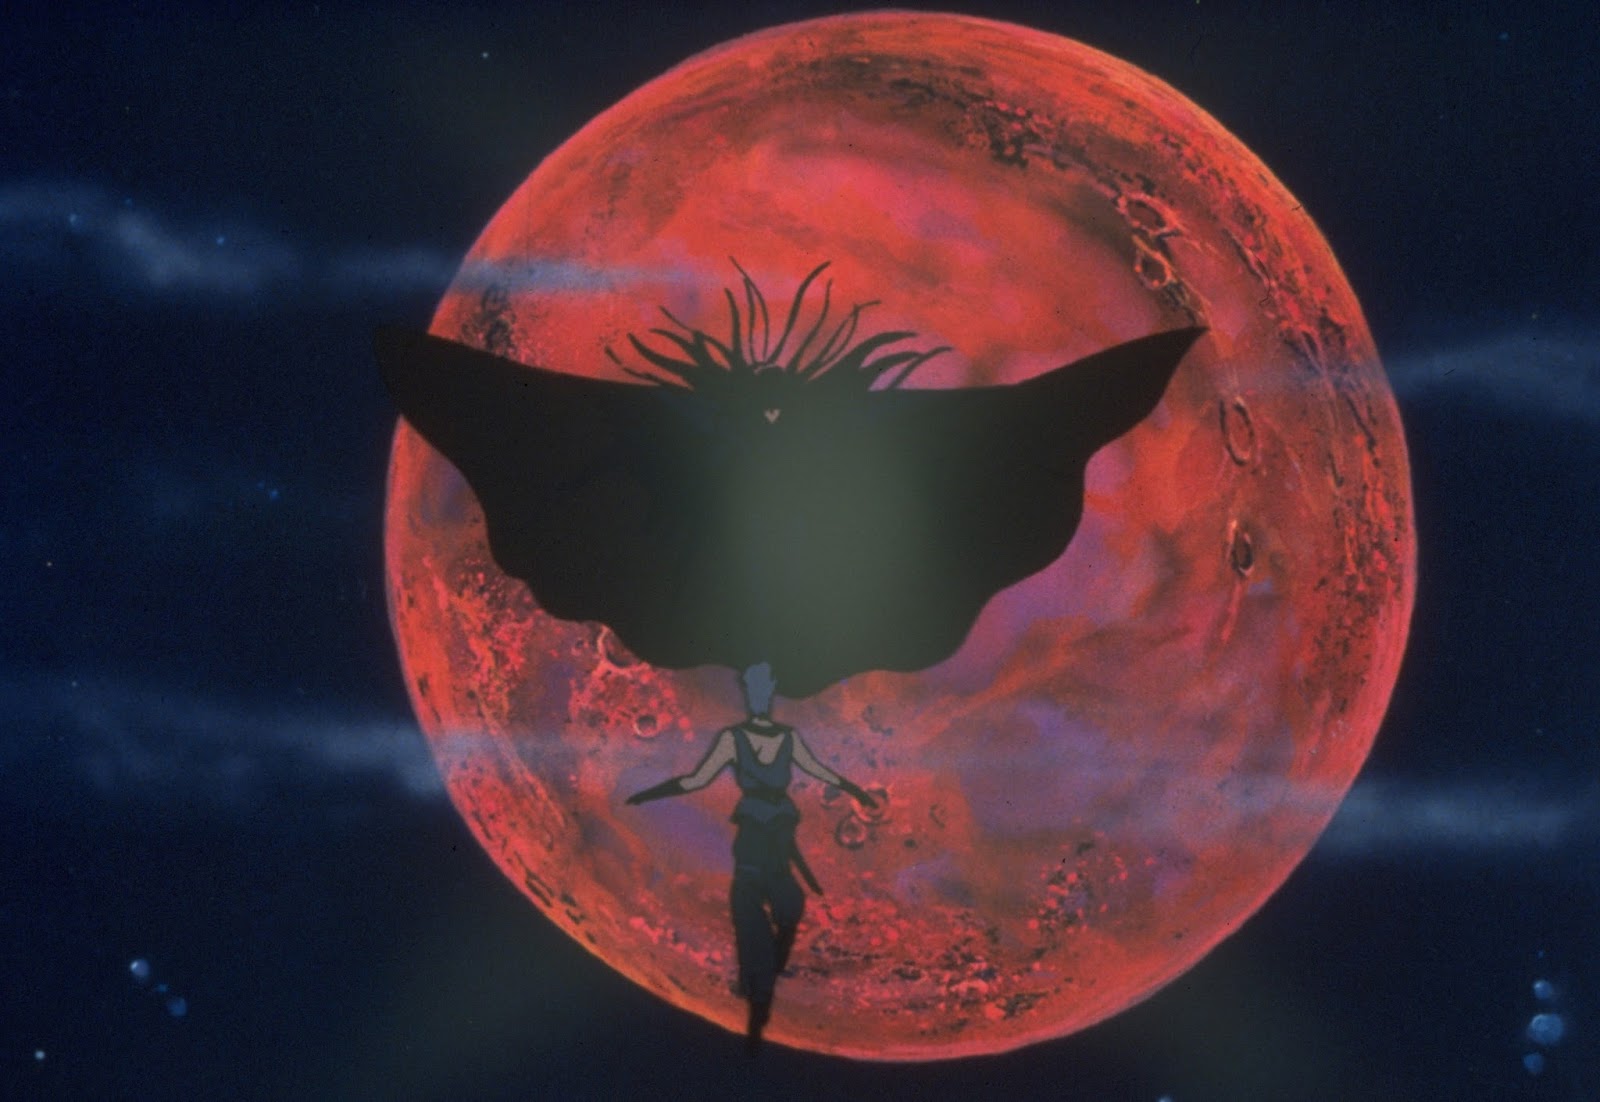 This shot from Vampire Hunter D (1985) reminds me of the Moon